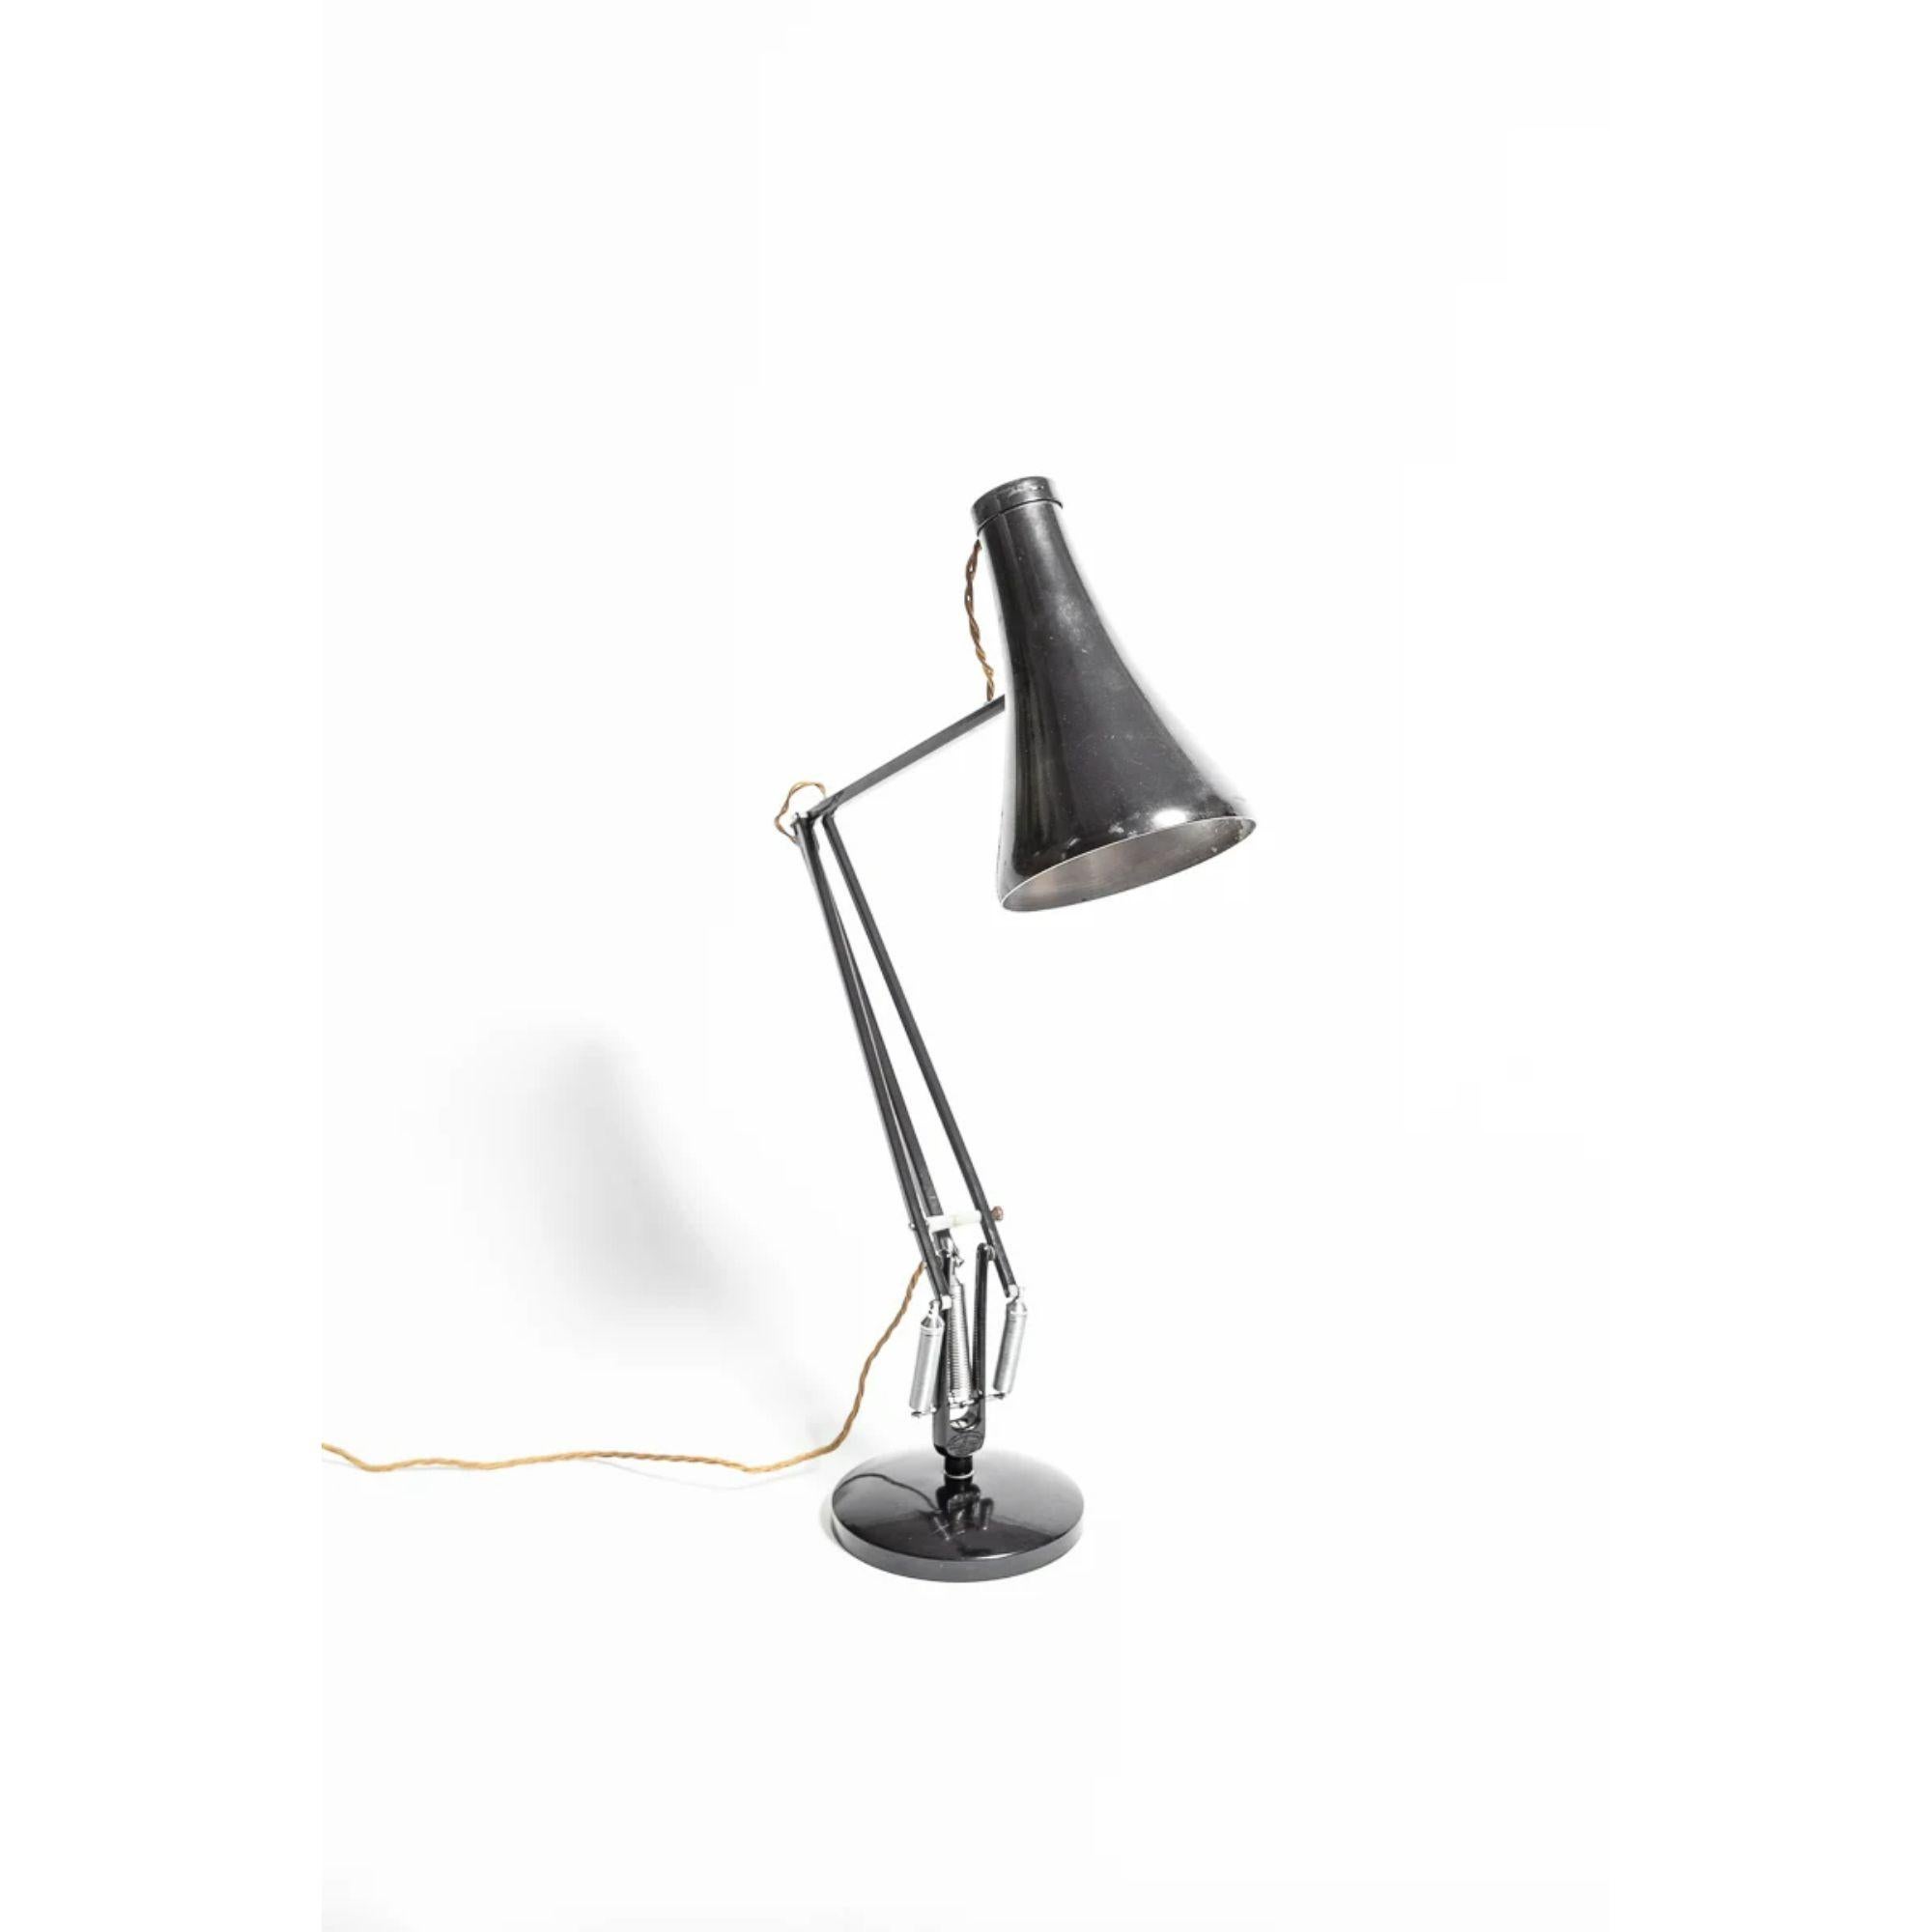 Herbert Terry & Sons Model 75 Anglepoise desk lamp, circa 1970

An original Herbert Terry Anglepoise lamp, c.1970. Light scratches to the enamel finish commensurate with age.

Dimensions: H 91cm x W 14cm.